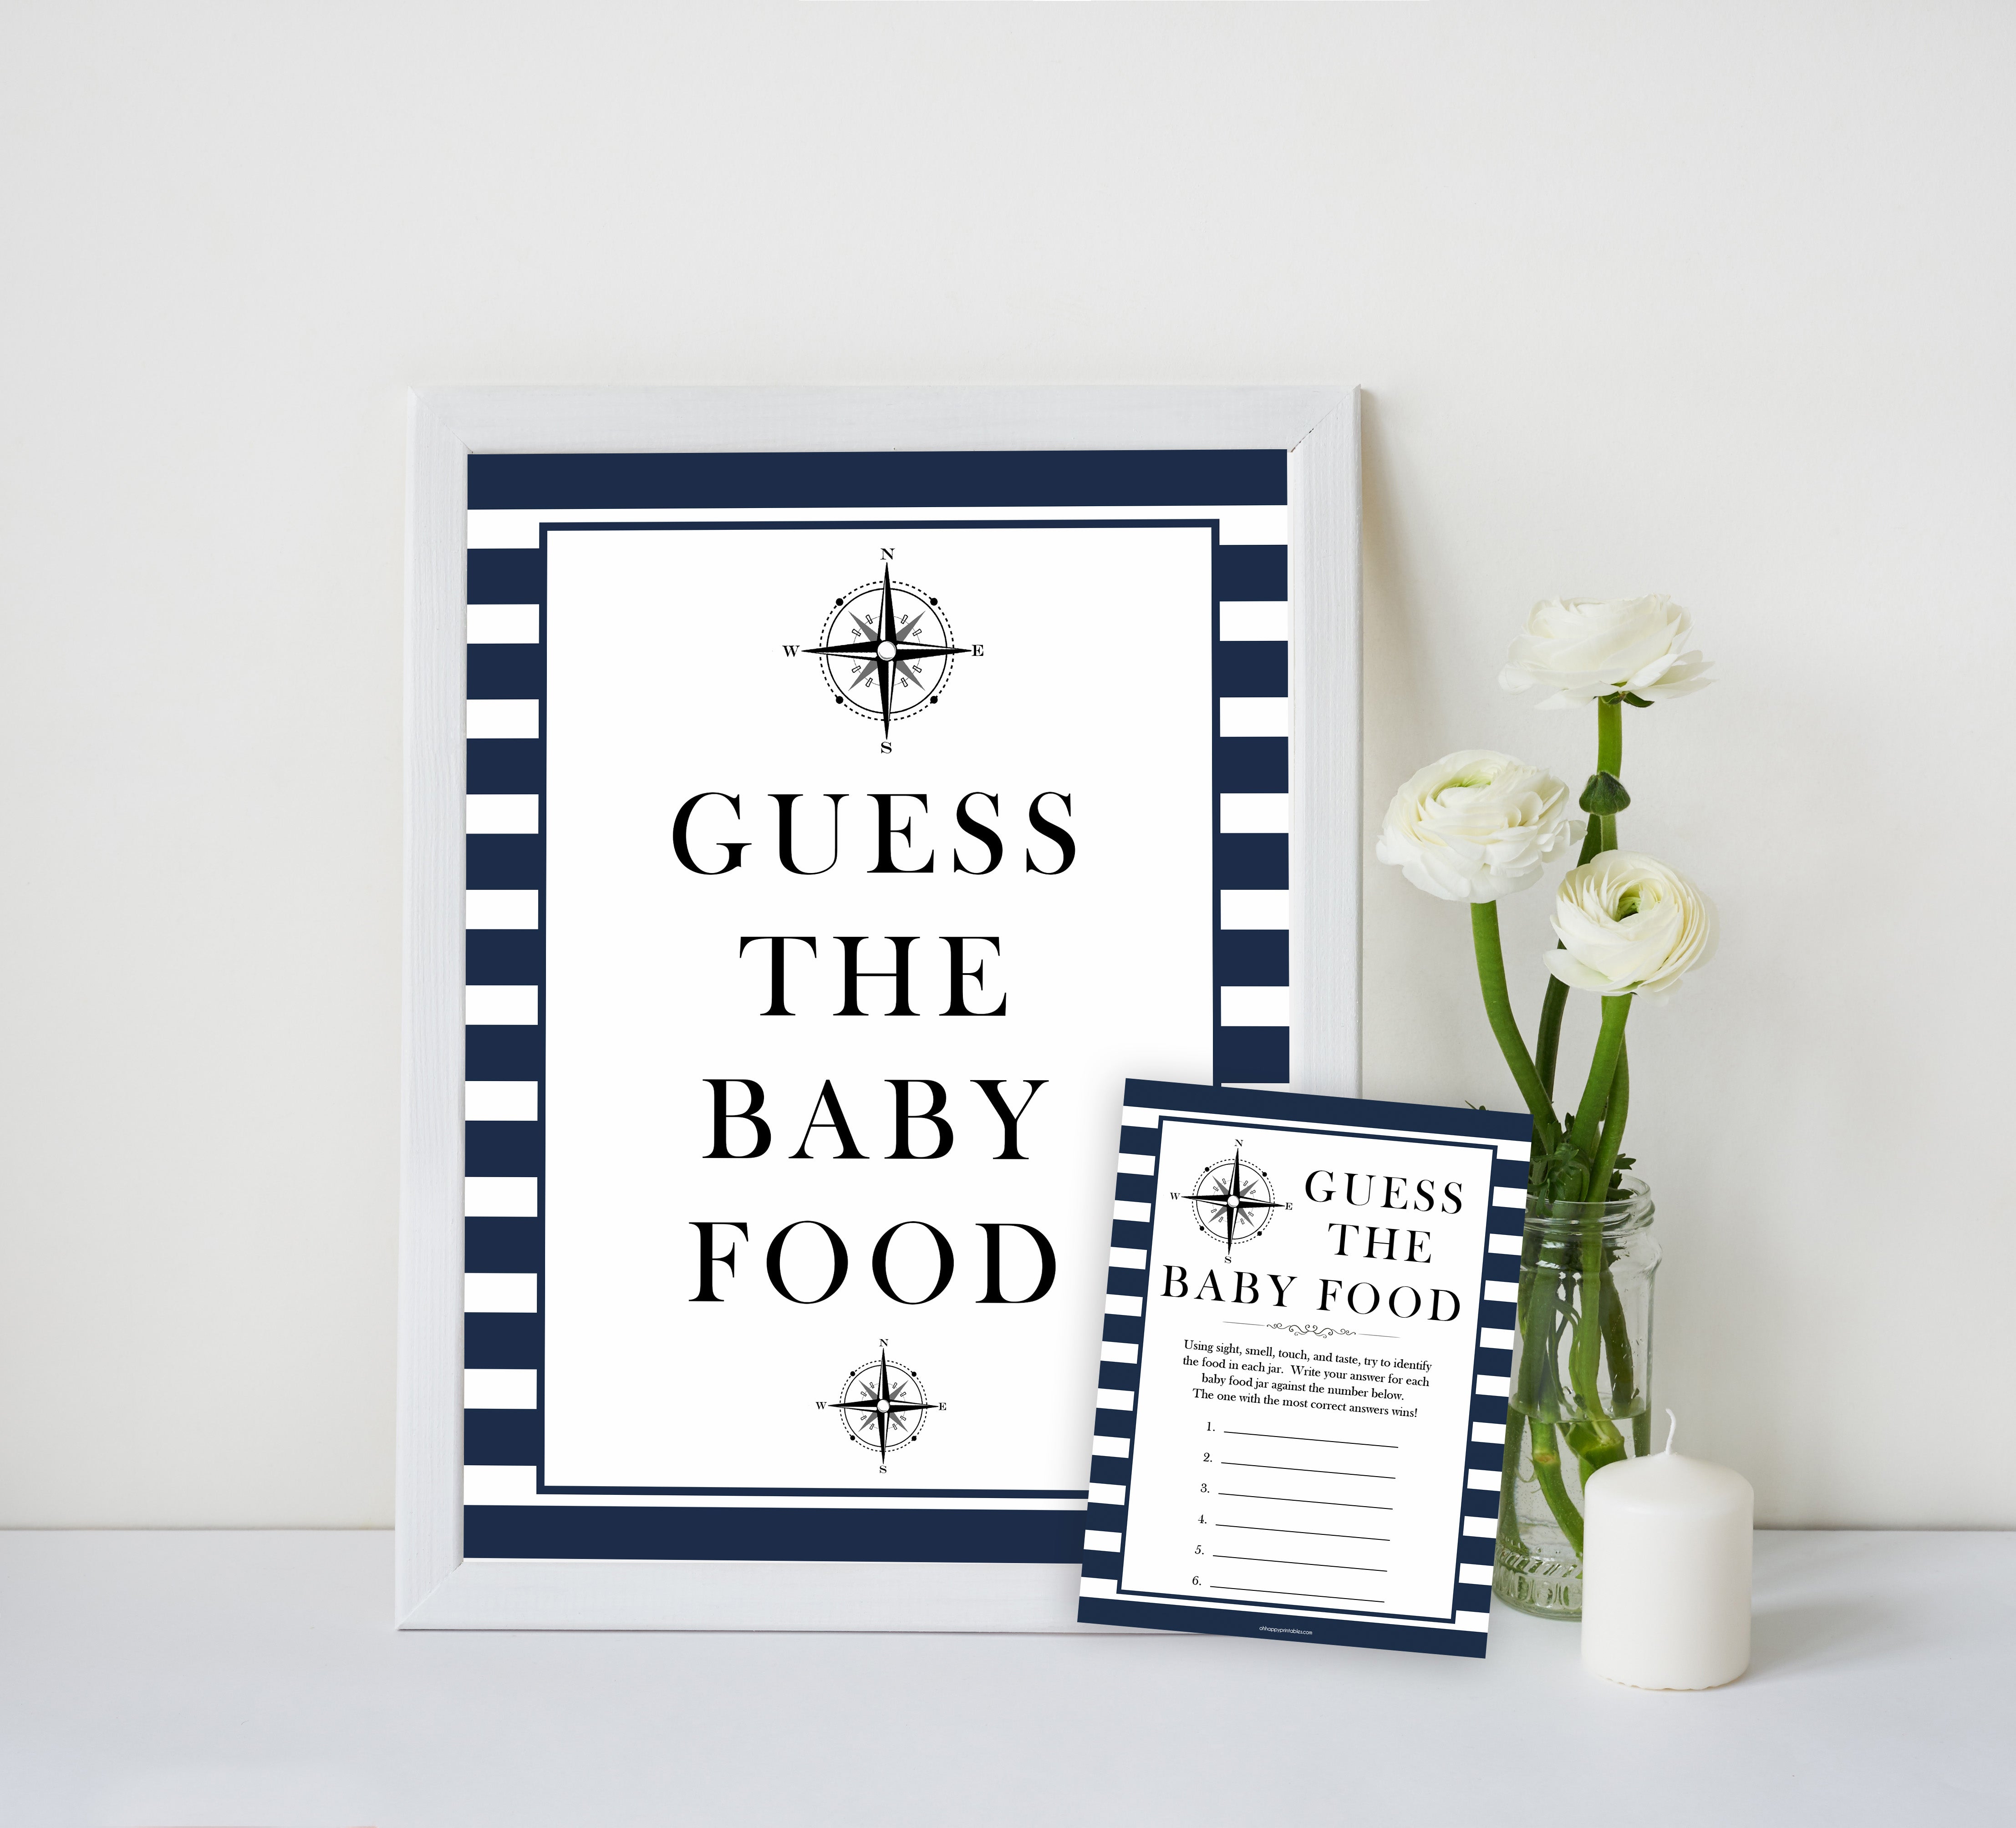 Nautical baby shower games, guess the baby food baby shower games, printable baby shower games, baby shower games, fun baby games, ahoy its a boy, popular baby shower games, sailor baby games, boat baby games